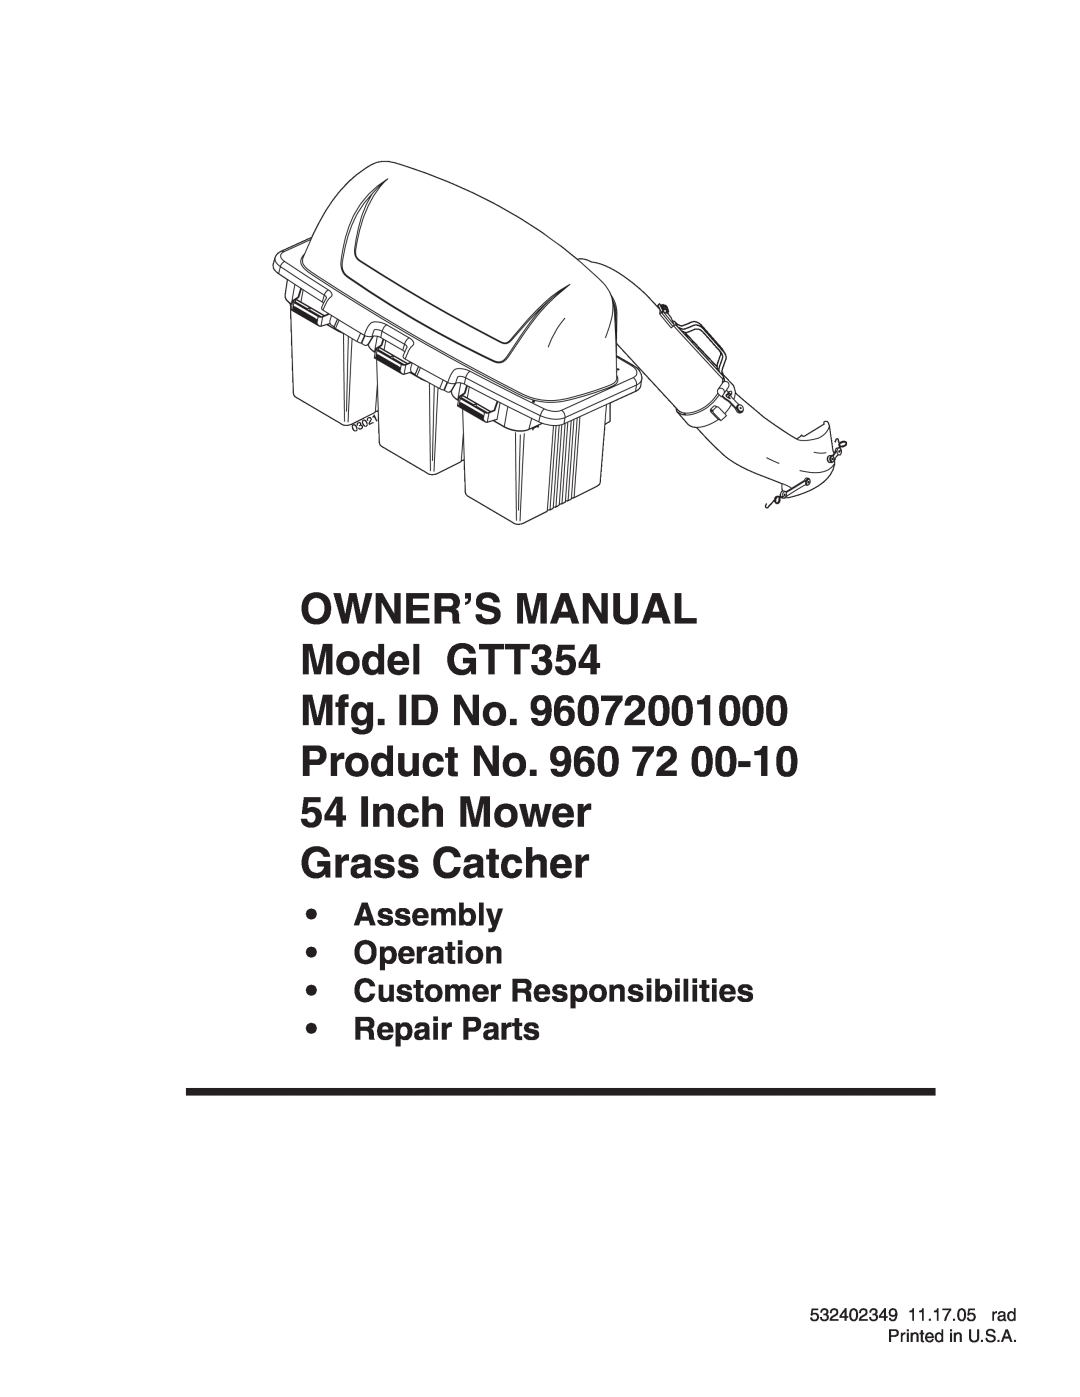 Poulan 96072001000, GTT354, 960 72 00-10 owner manual Product No. 960 72 54 Inch Mower Grass Catcher, Repair Parts 